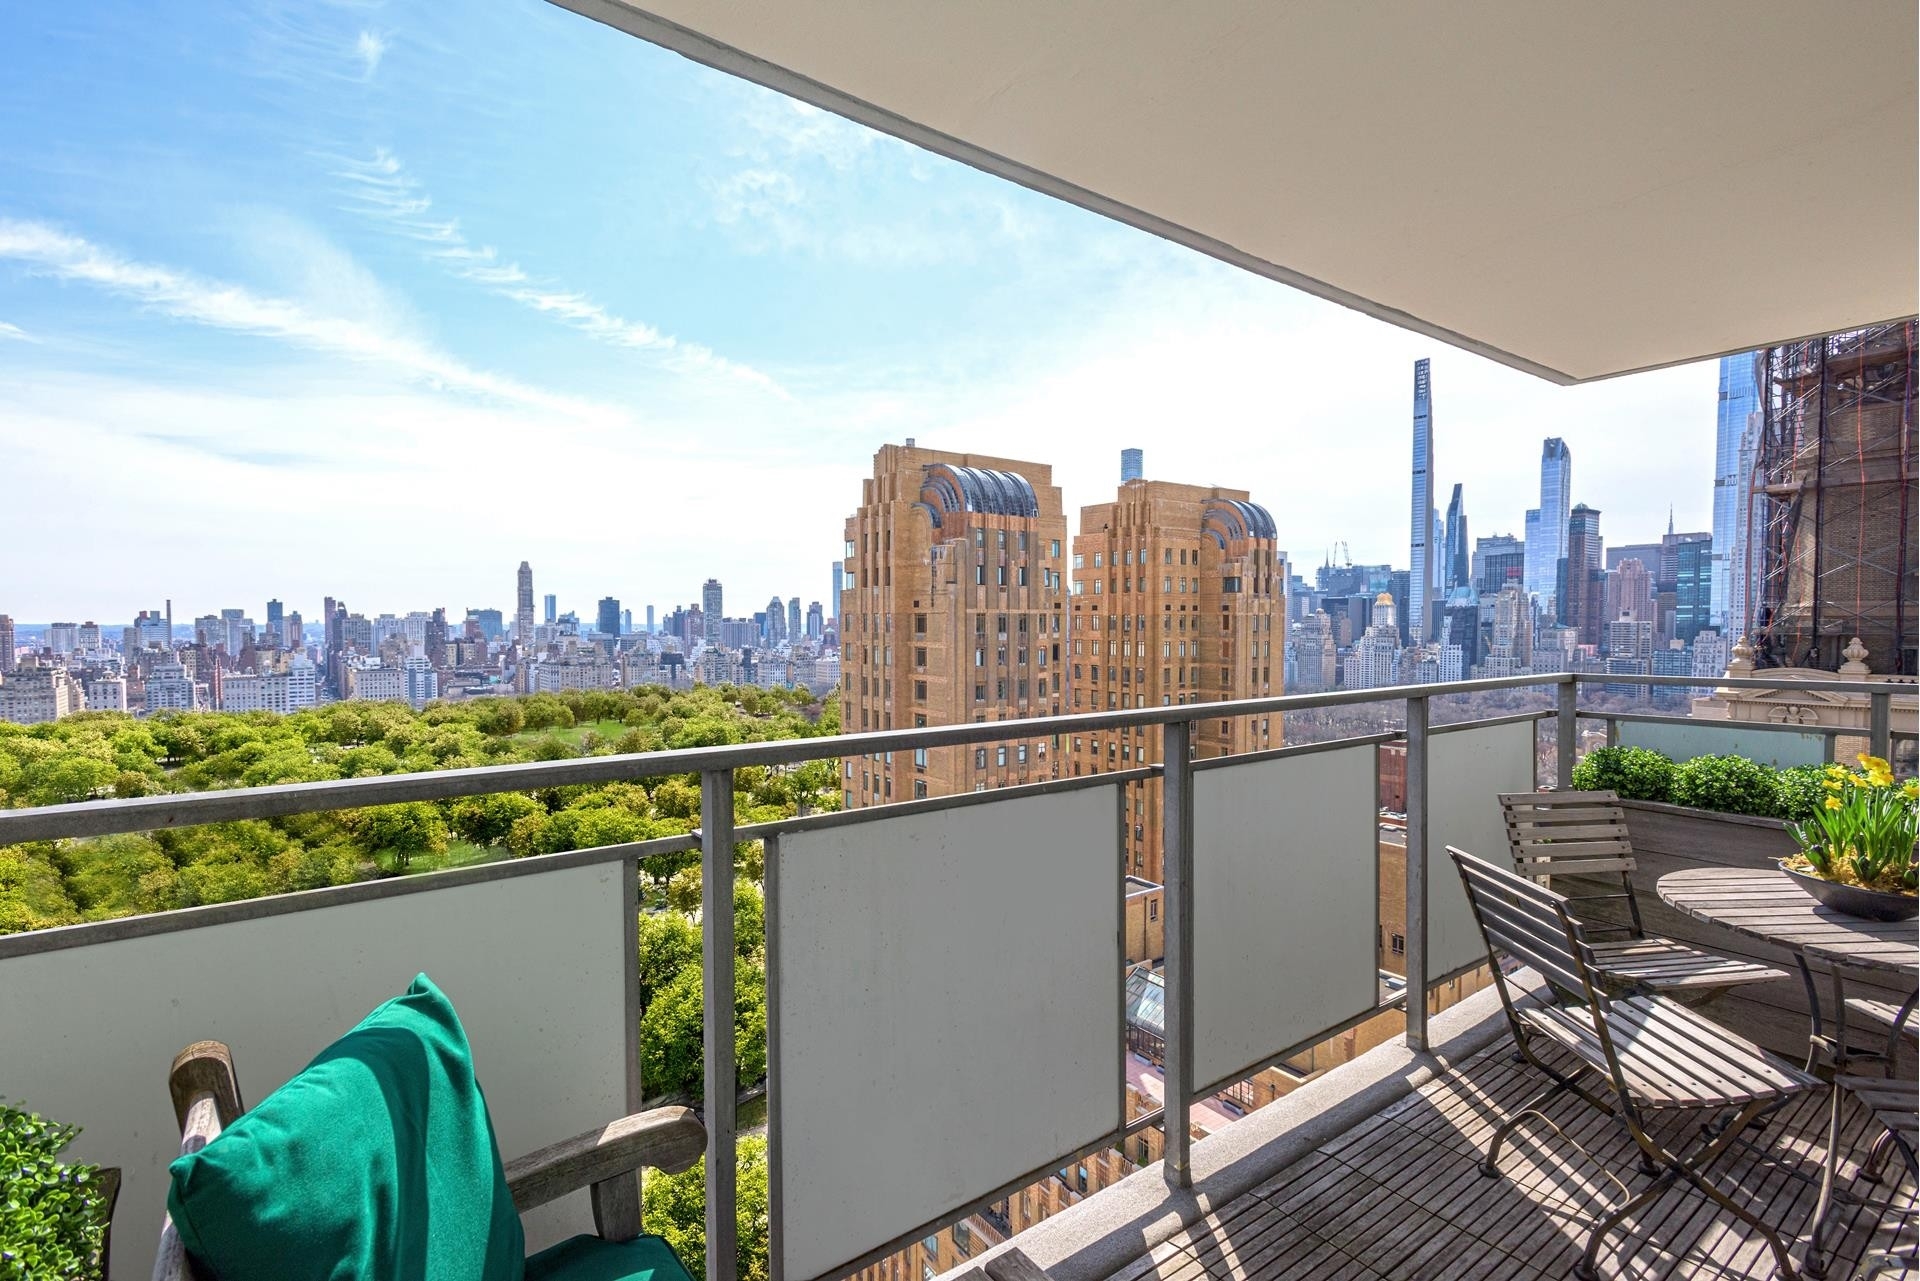 Co-op Properties for Sale at Mayfair Towers, 15 W 72ND ST, 36F Upper West Side, New York, NY 10023